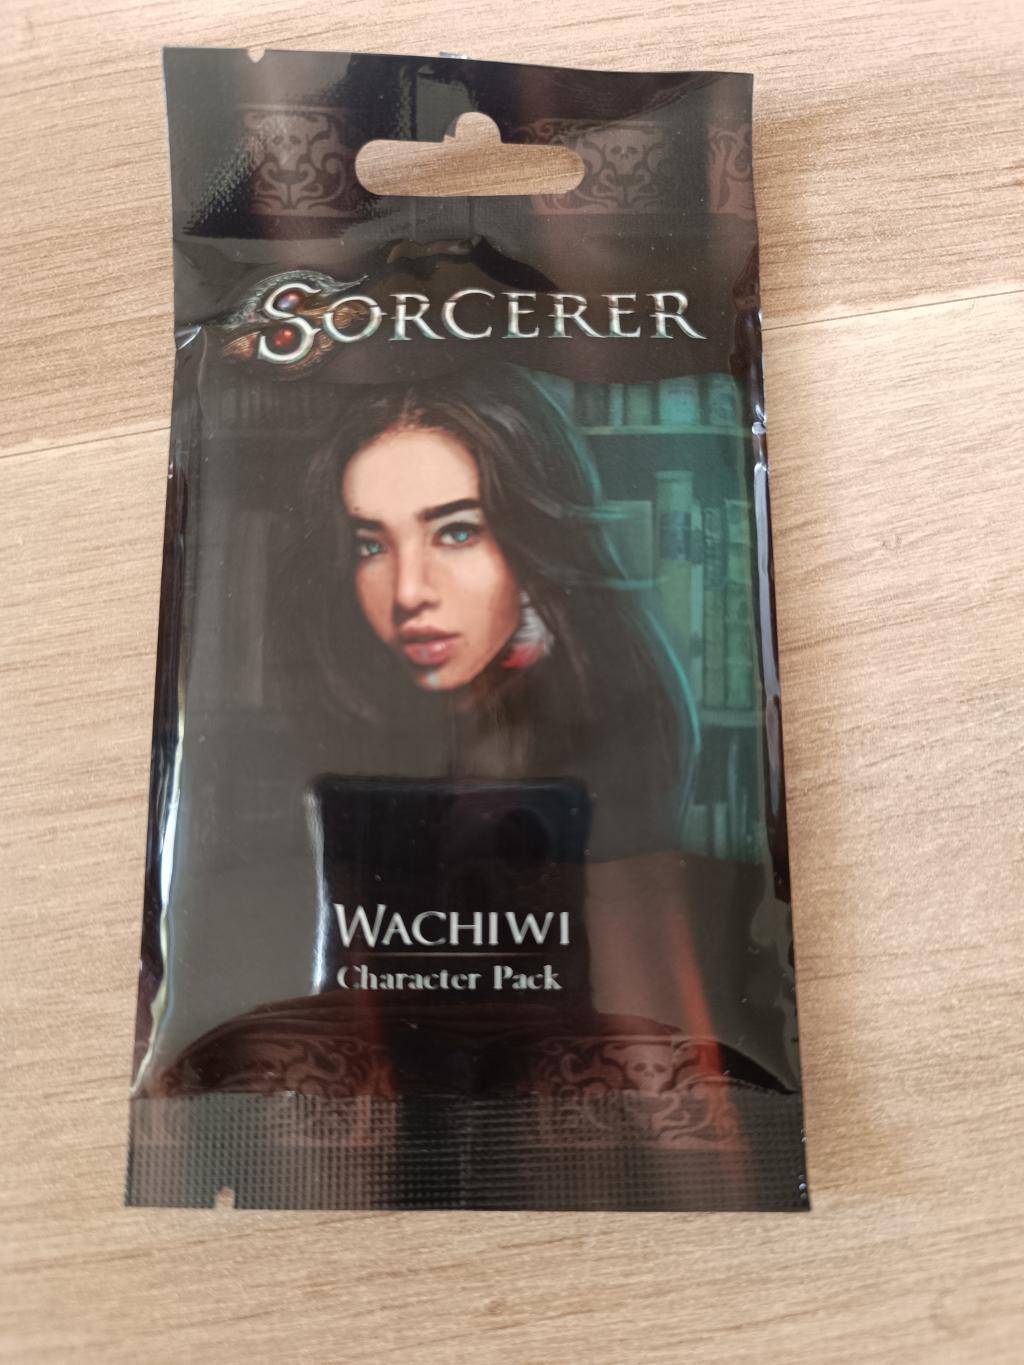 Sorcerer - Wachiwi Charecter Pack